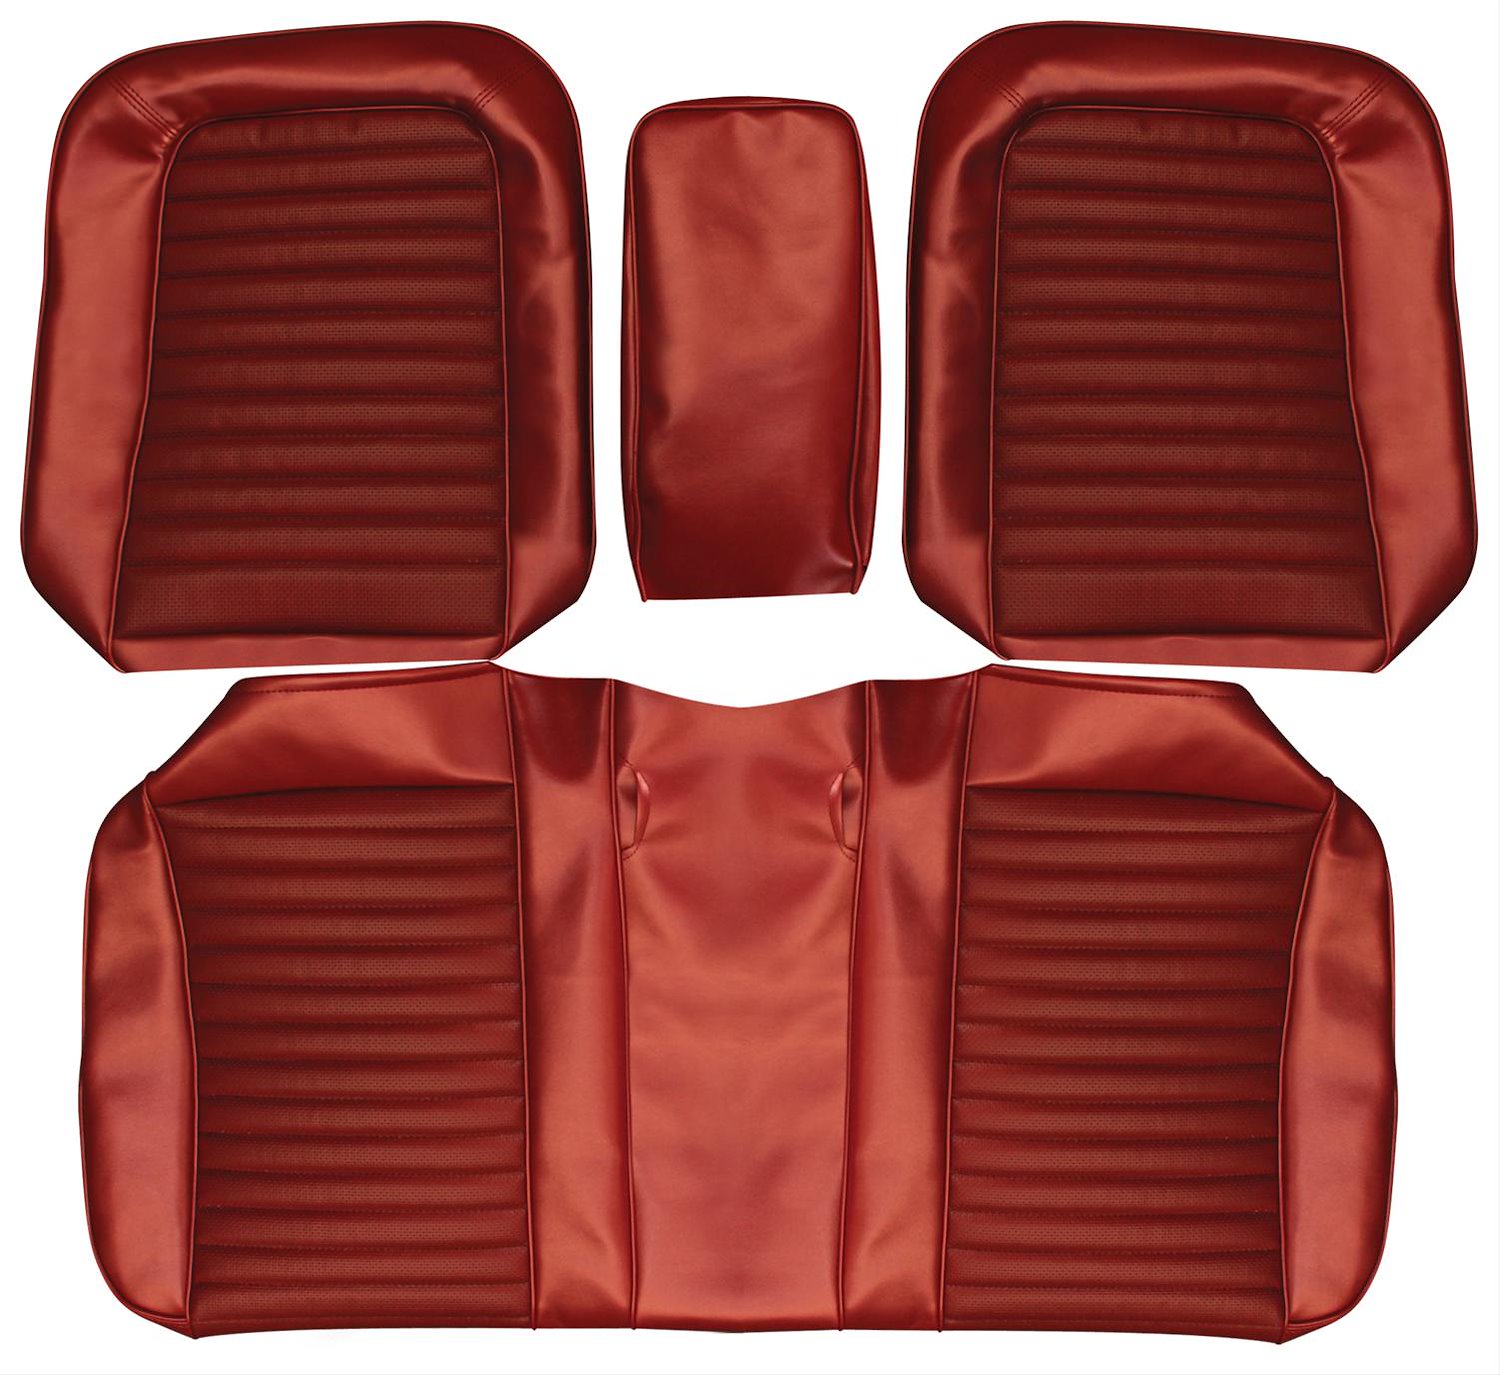 1966 Ford Mustang Convertible Standard Interior Front and Rear Bench Seat Upholstery Set